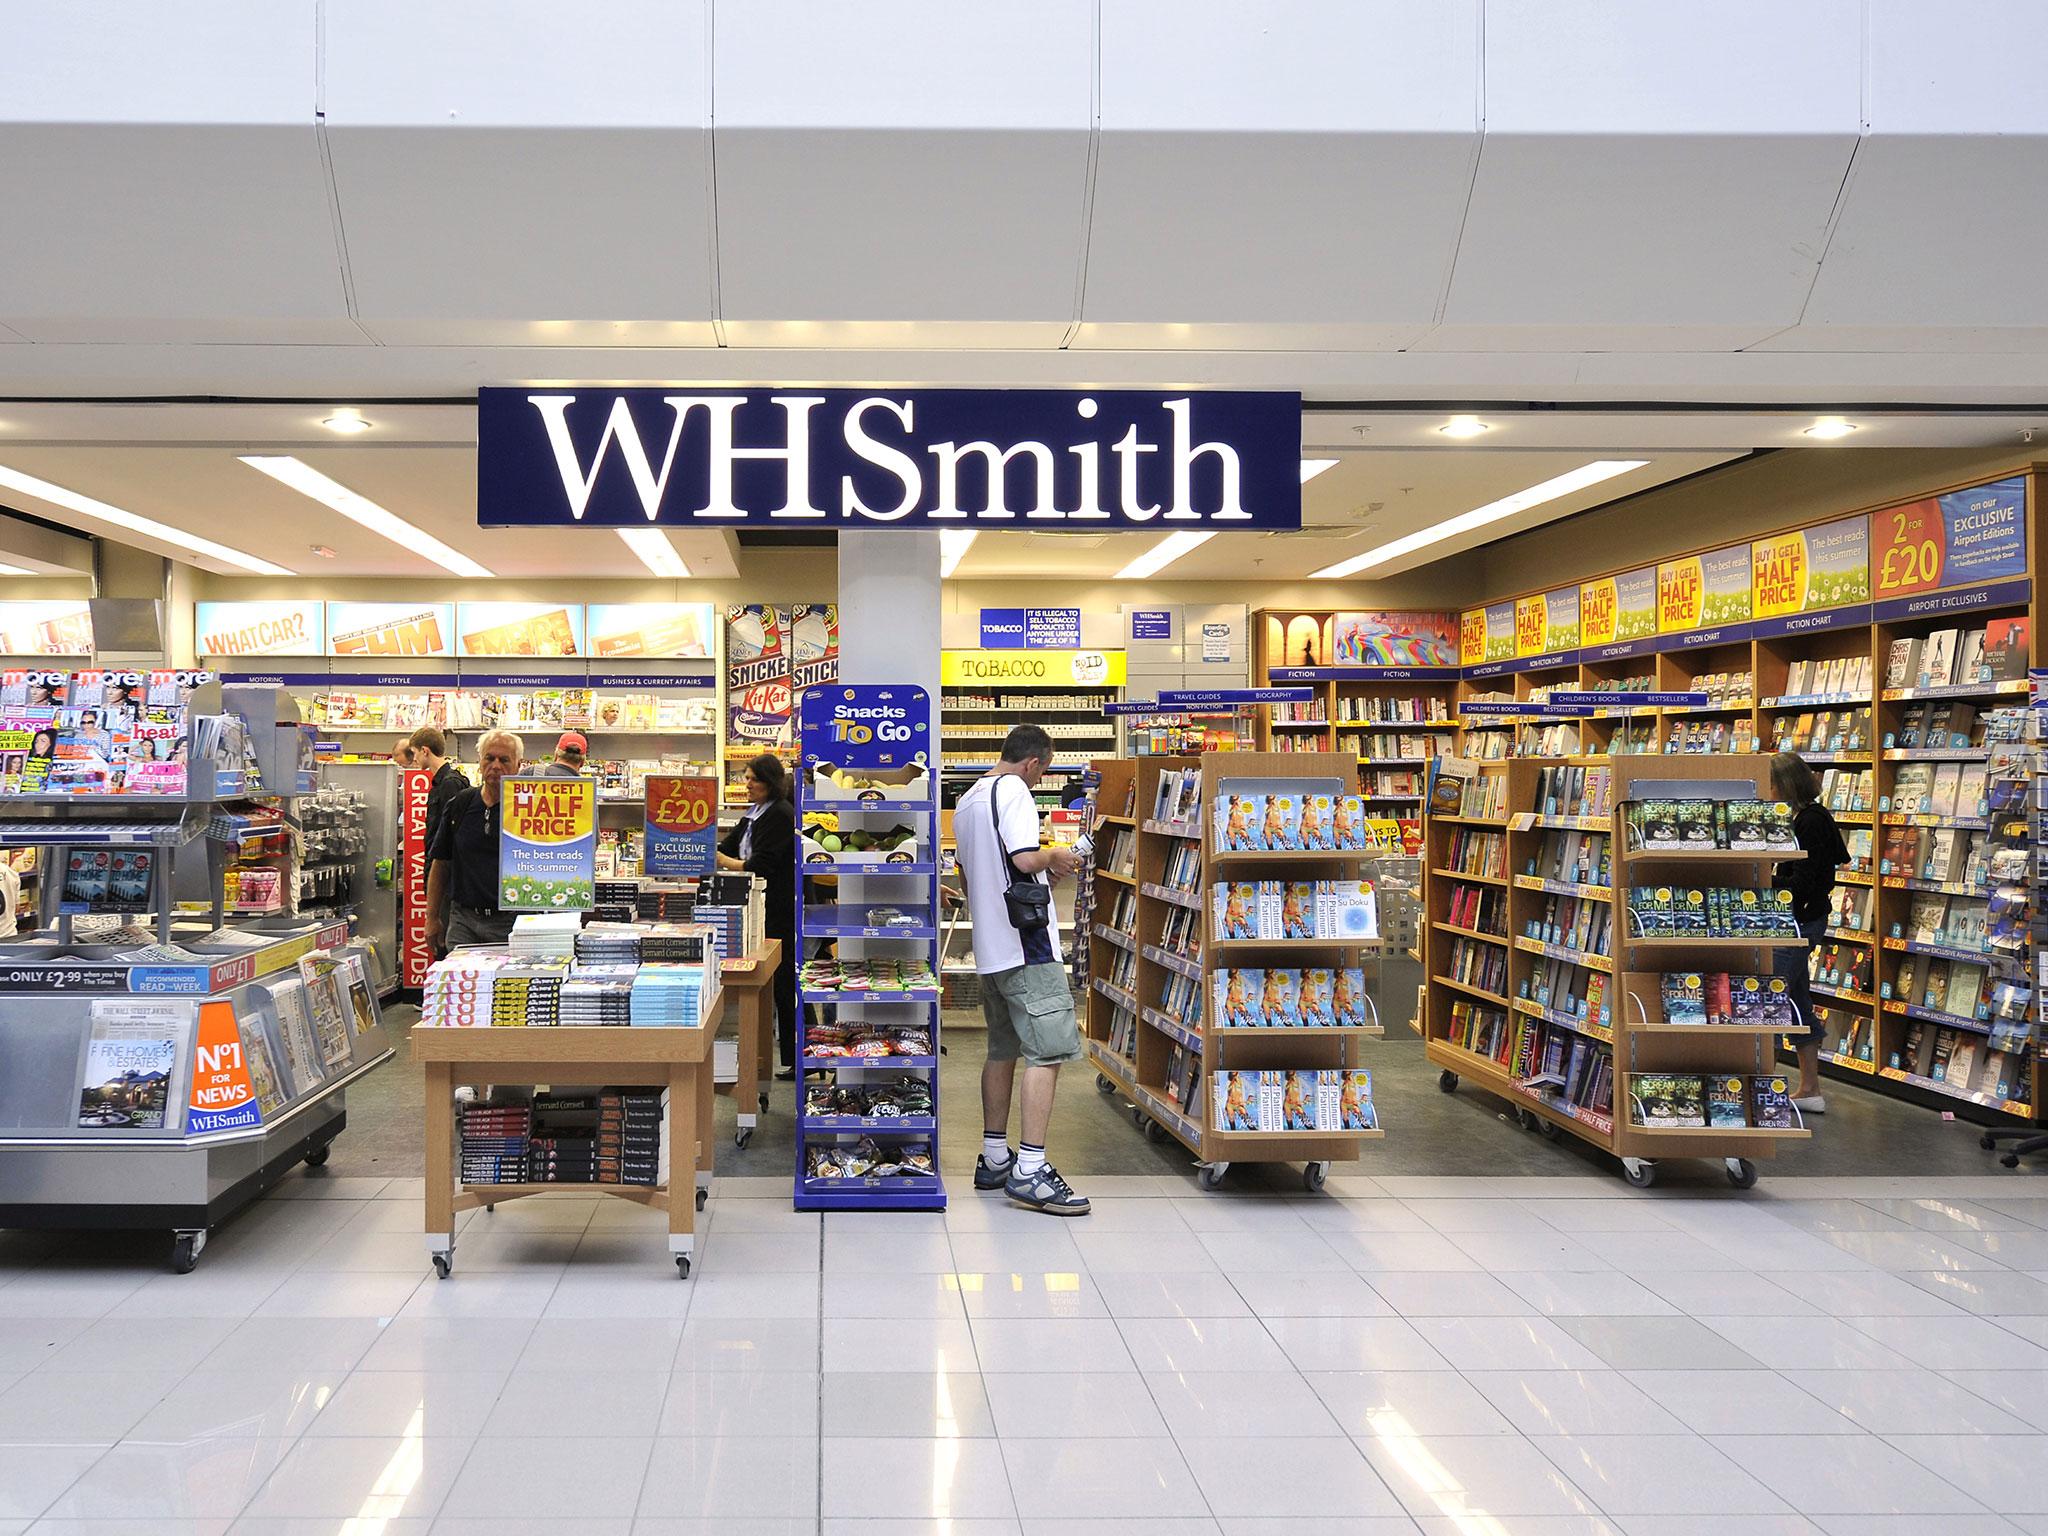 Travellers have already reported protests in branches of WHSmith, including at Heathrow